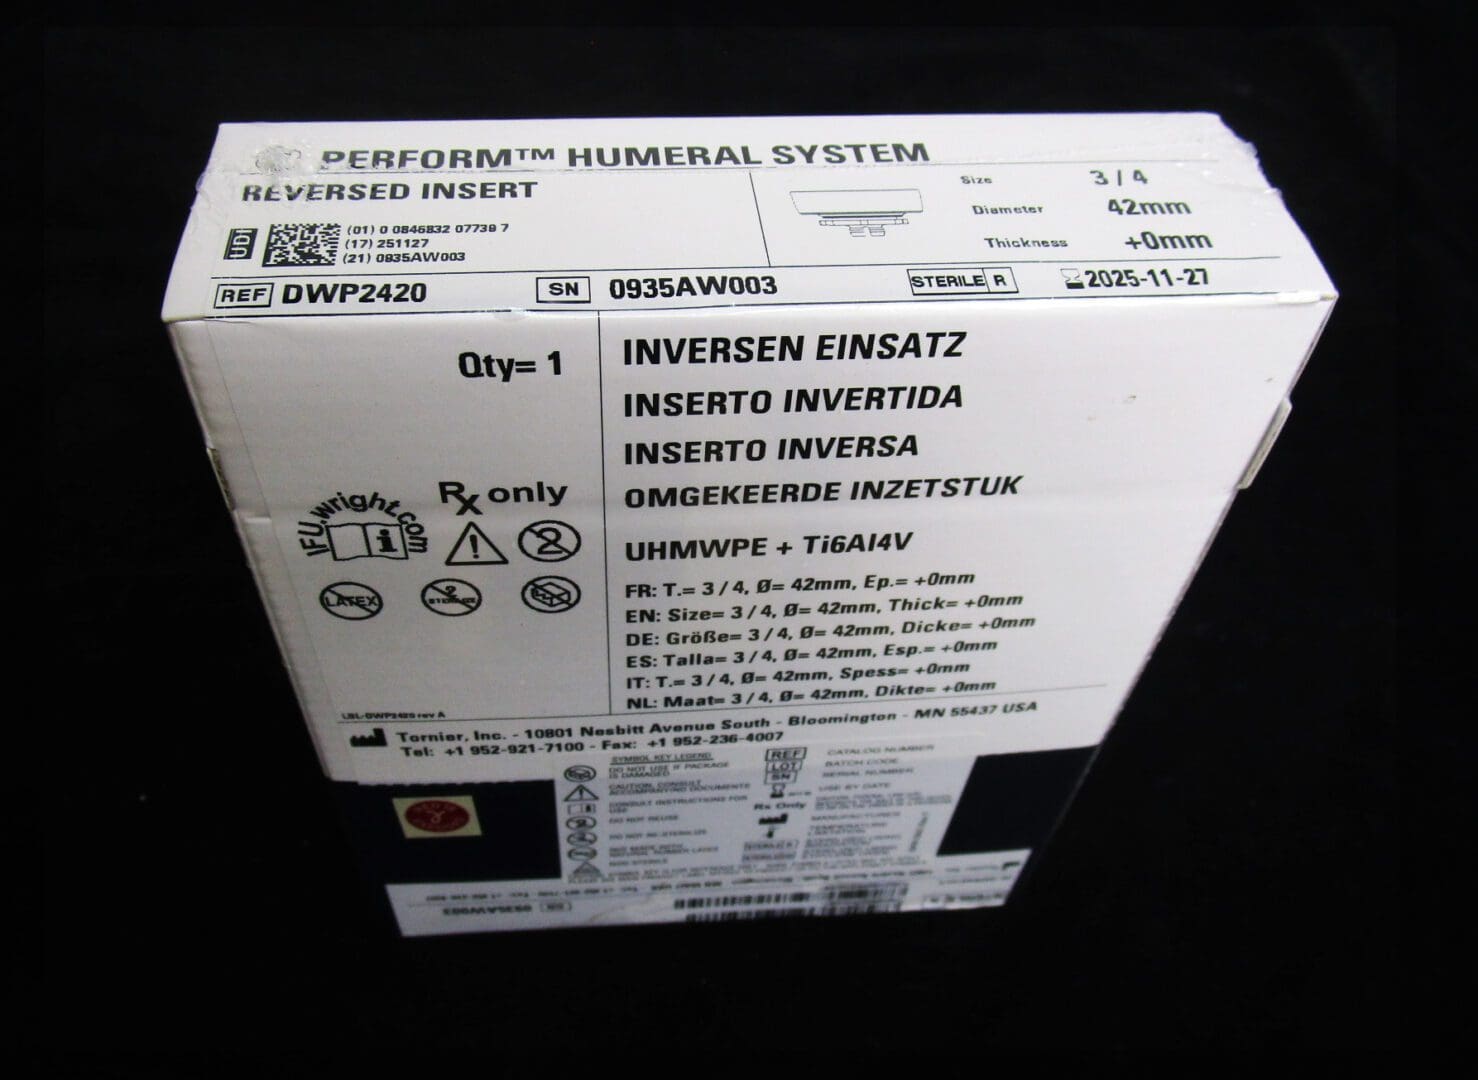 A box of the new inversion system.